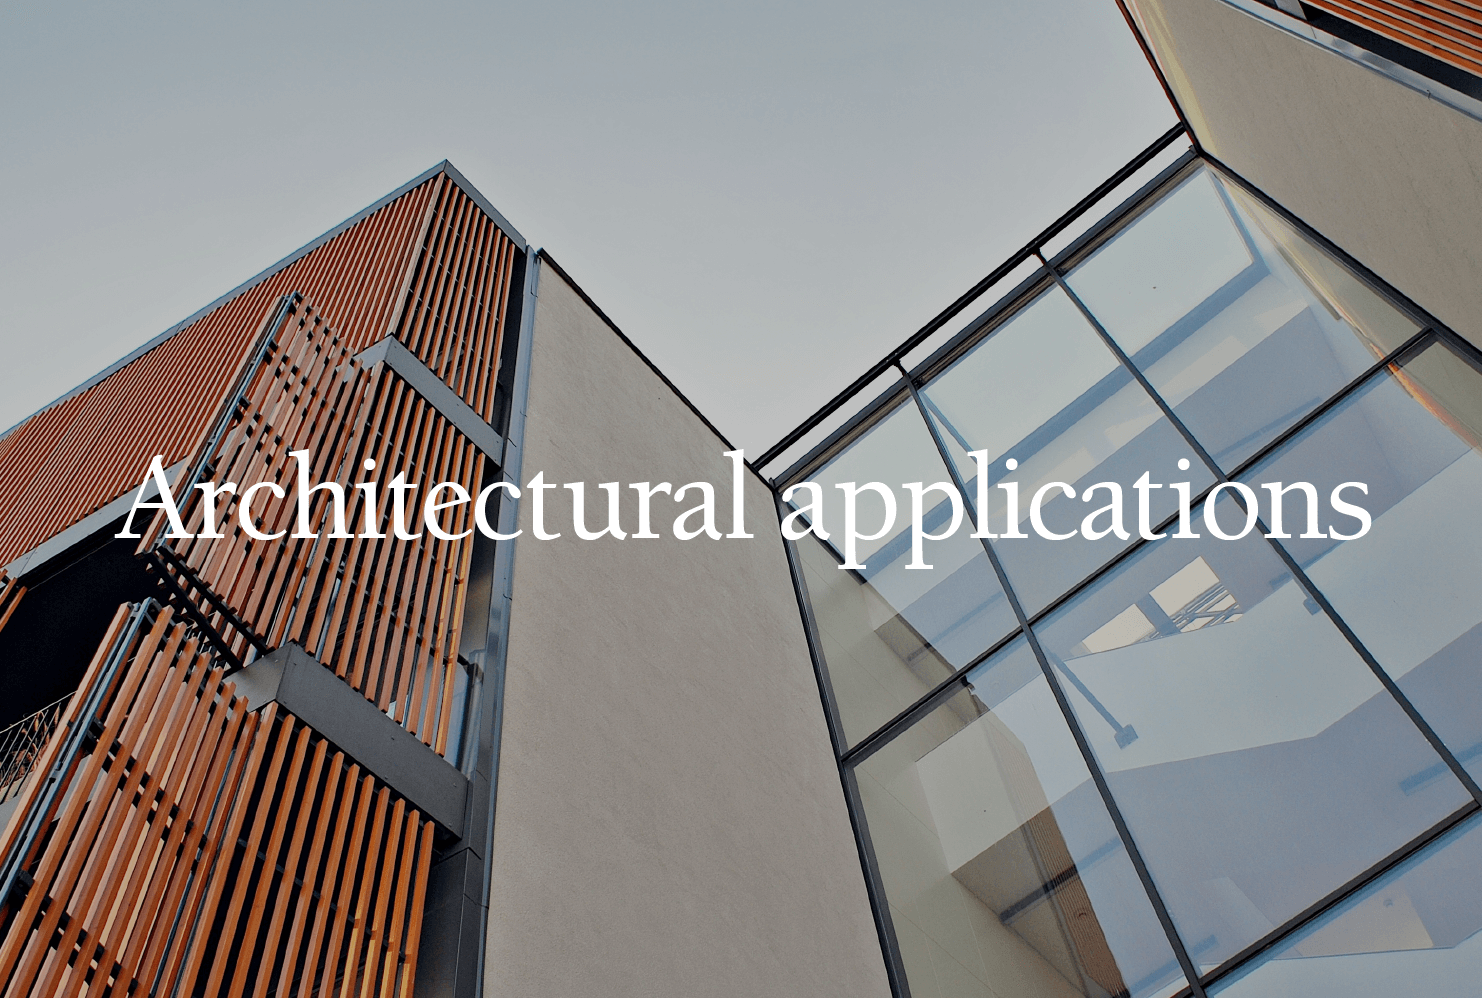 Architectural-applications